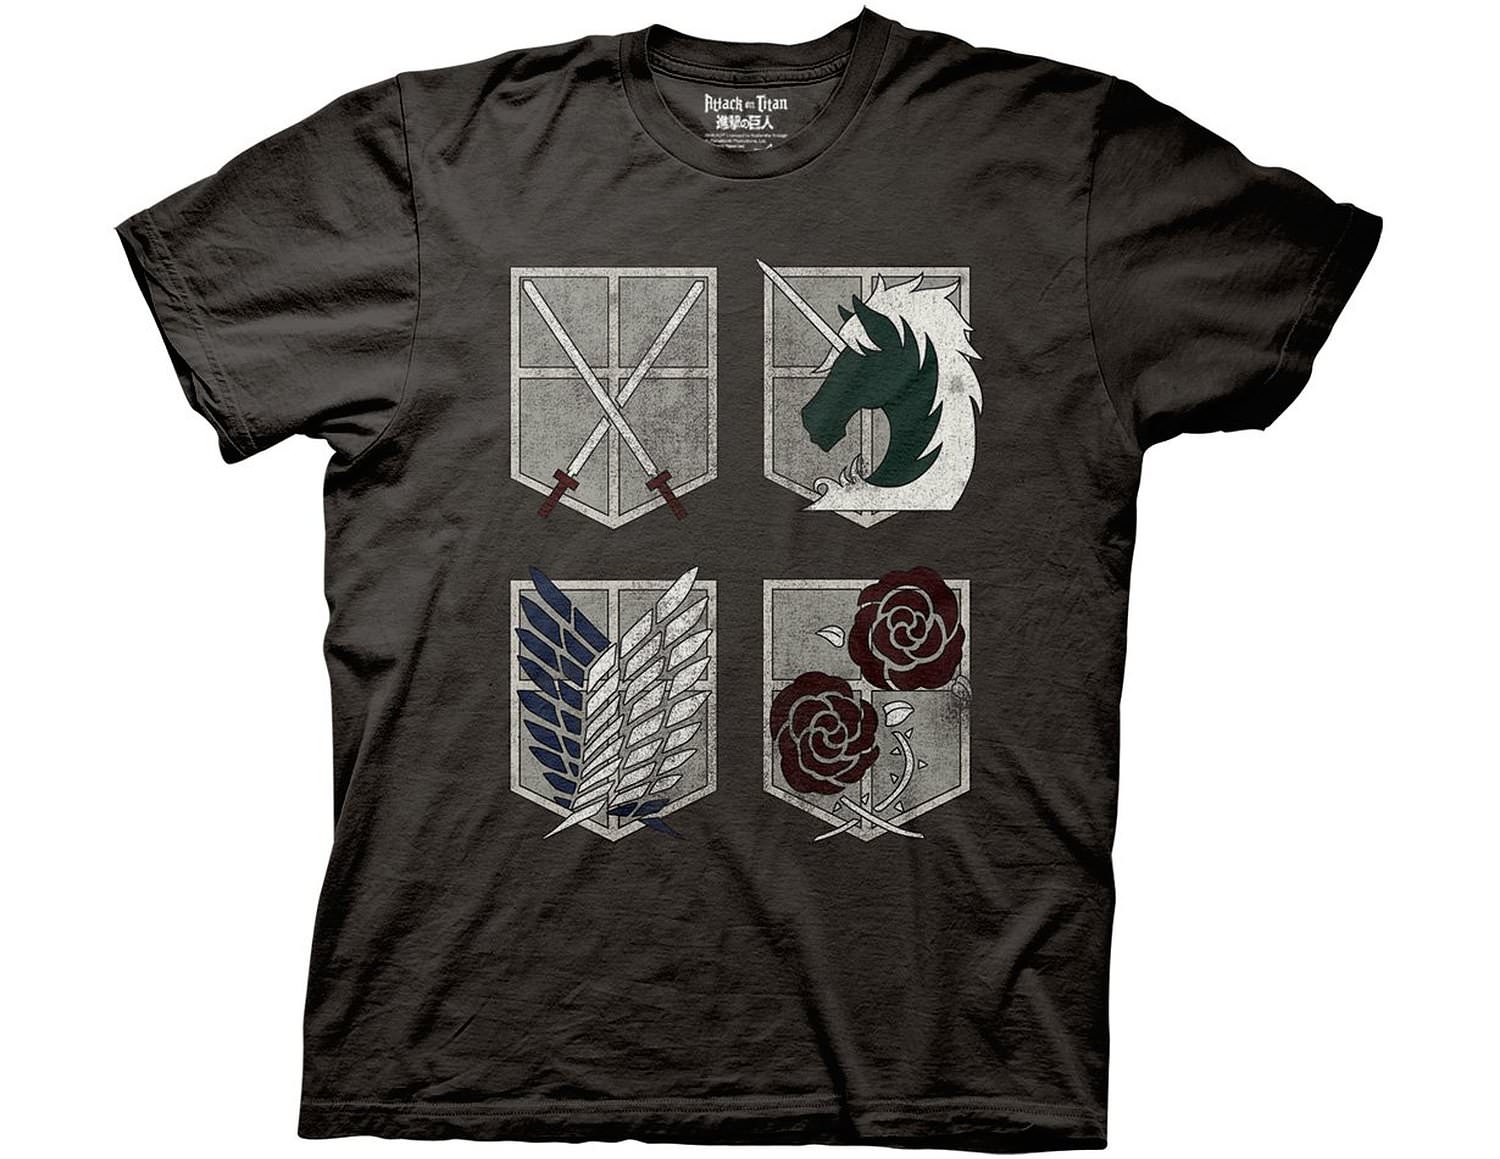 Attack On Titan Men's Short Sleeve Graphic Tee - image 1 of 2